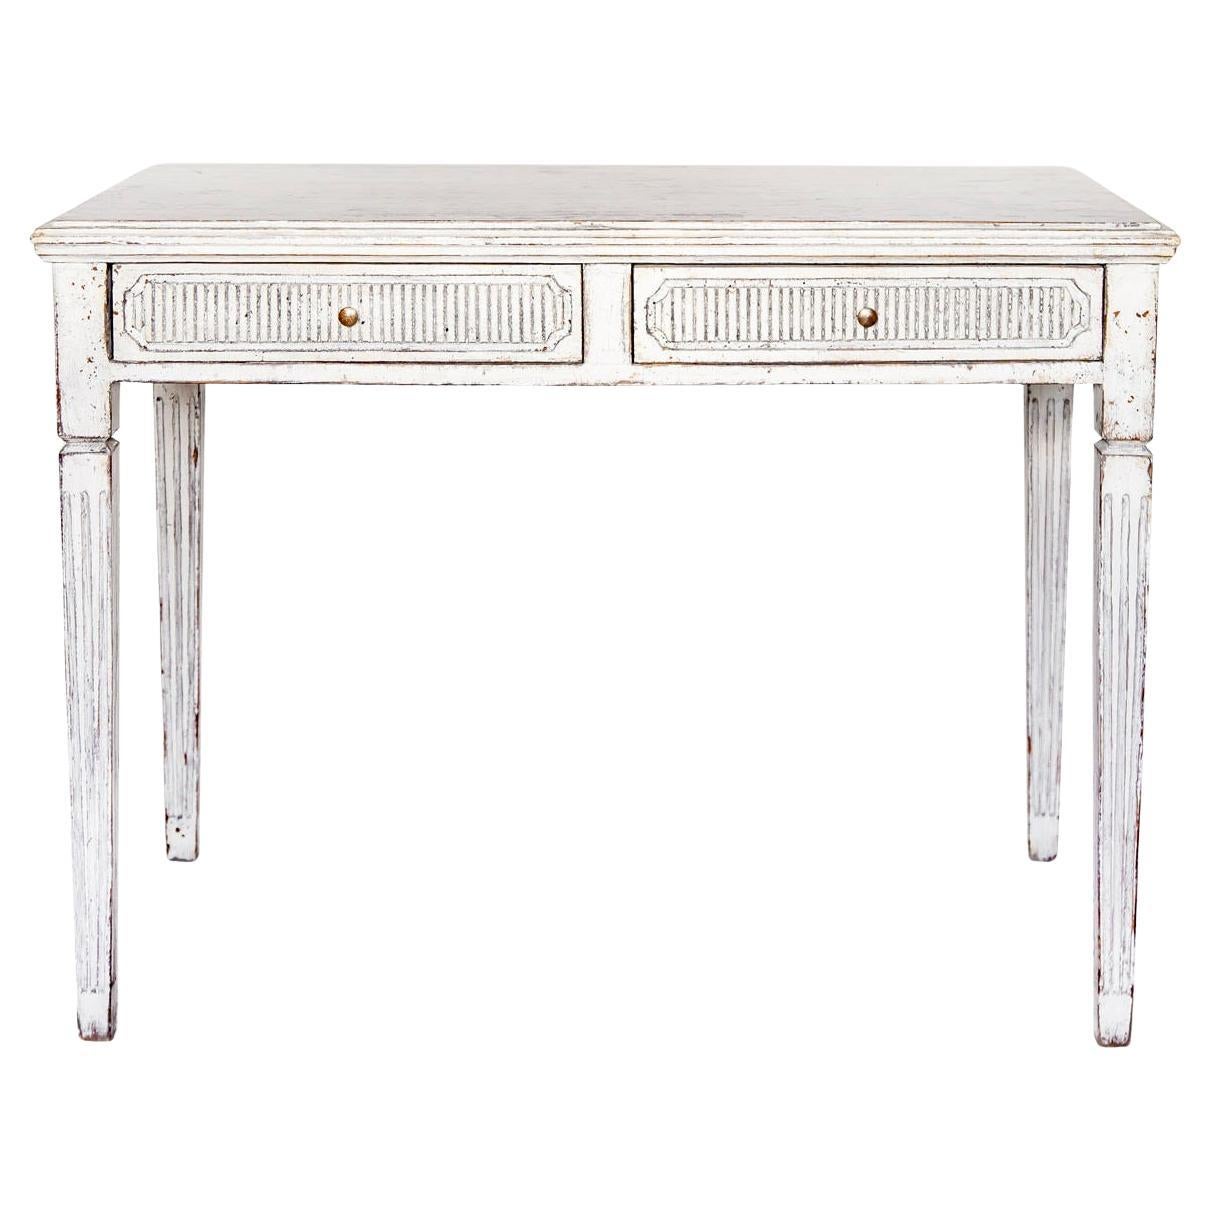 Swedish Antique Gustavian Console Table Desk Grey White Carved Detail 1850-1870 For Sale